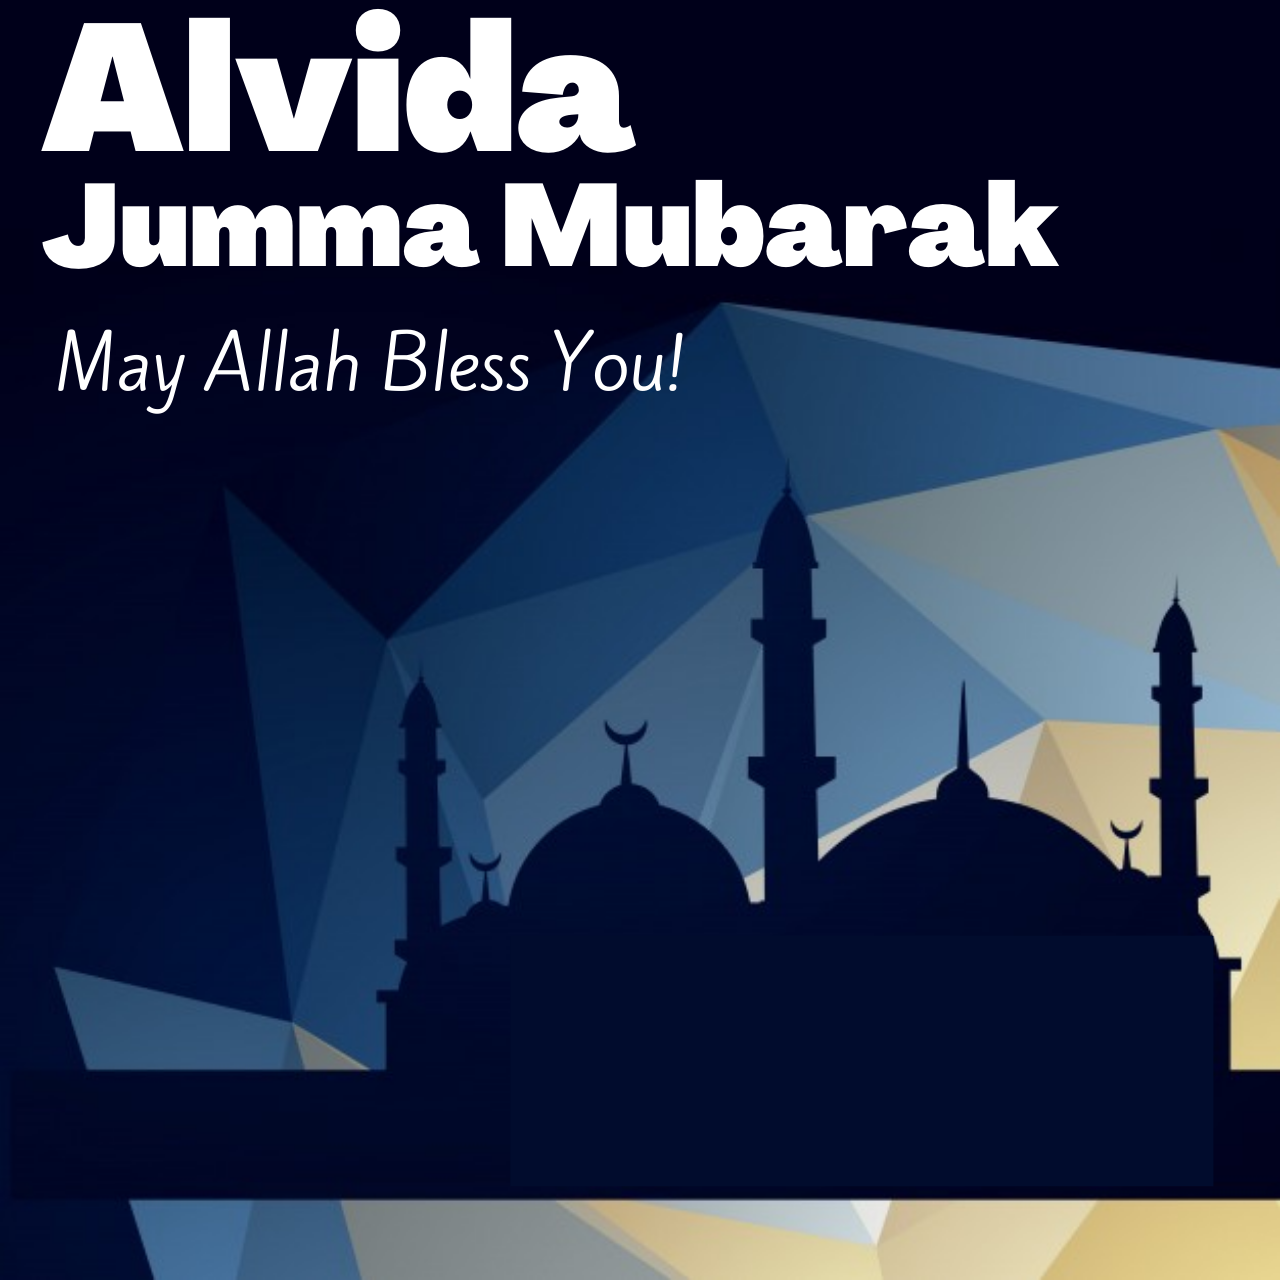 Alvida Jumma Mubarak 2021 Wishes, Status, DP, Images (Photos), Shayari, Quotes, Messages, Greetings, and GIF to share with Friends, and Relatives